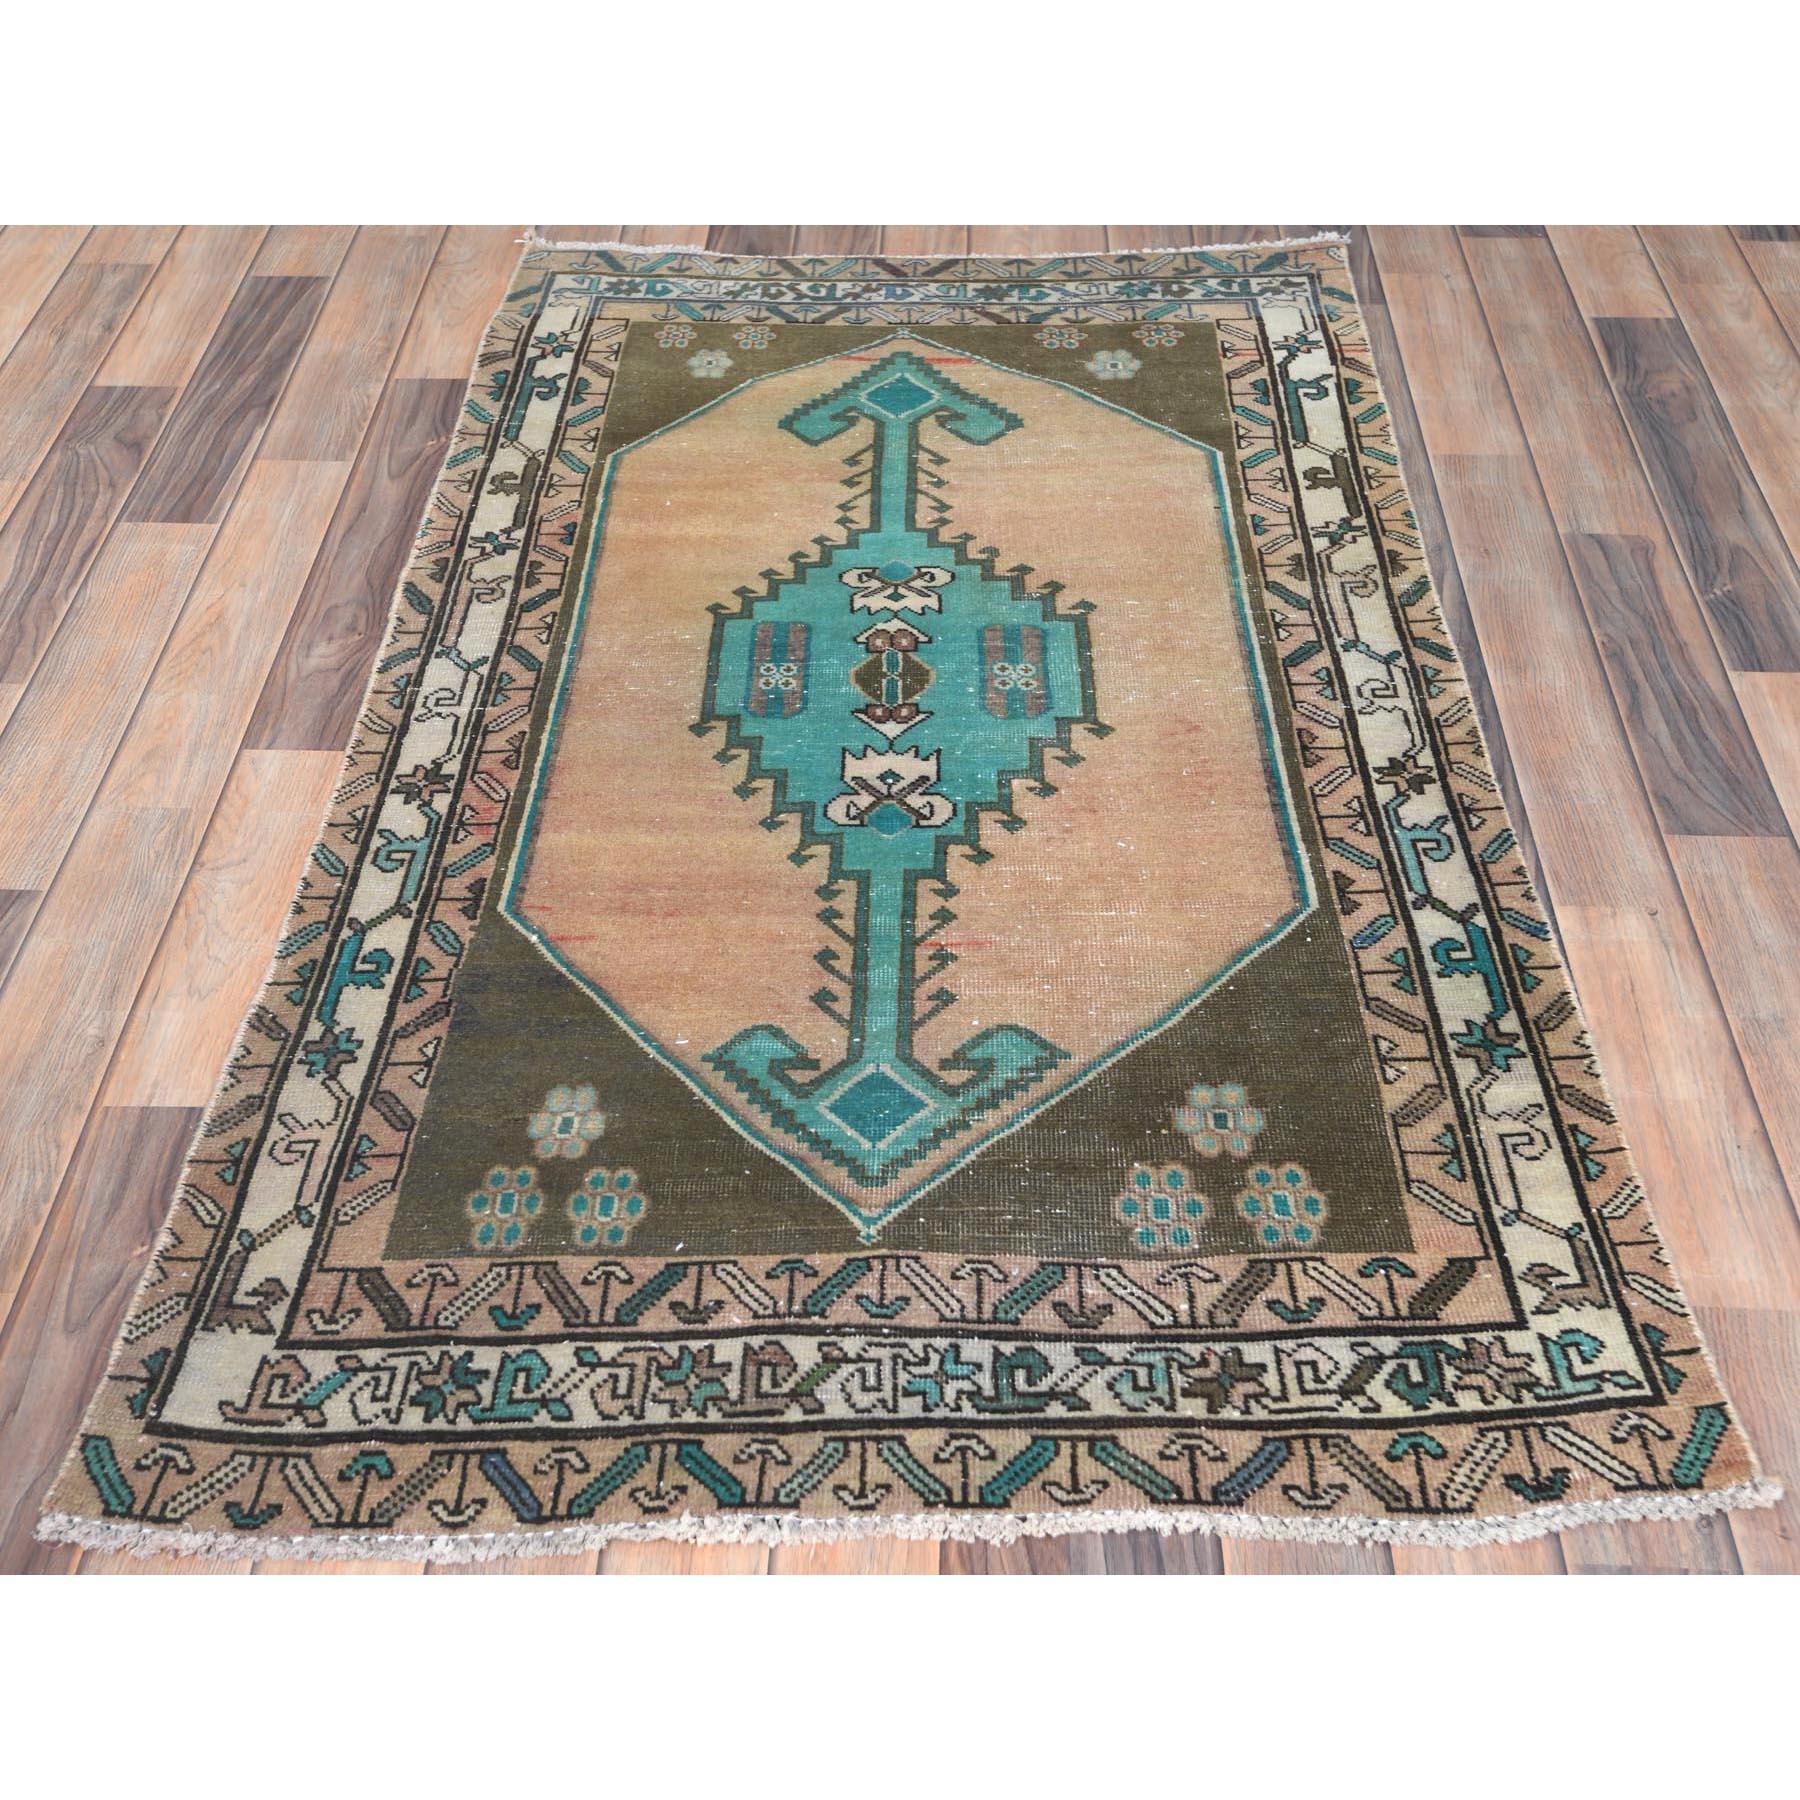 This fabulous Hand-Knotted carpet has been created and designed for extra strength and durability. This rug has been handcrafted for weeks in the traditional method that is used to makeExact Rug Size in Feet and Inches : 3'0